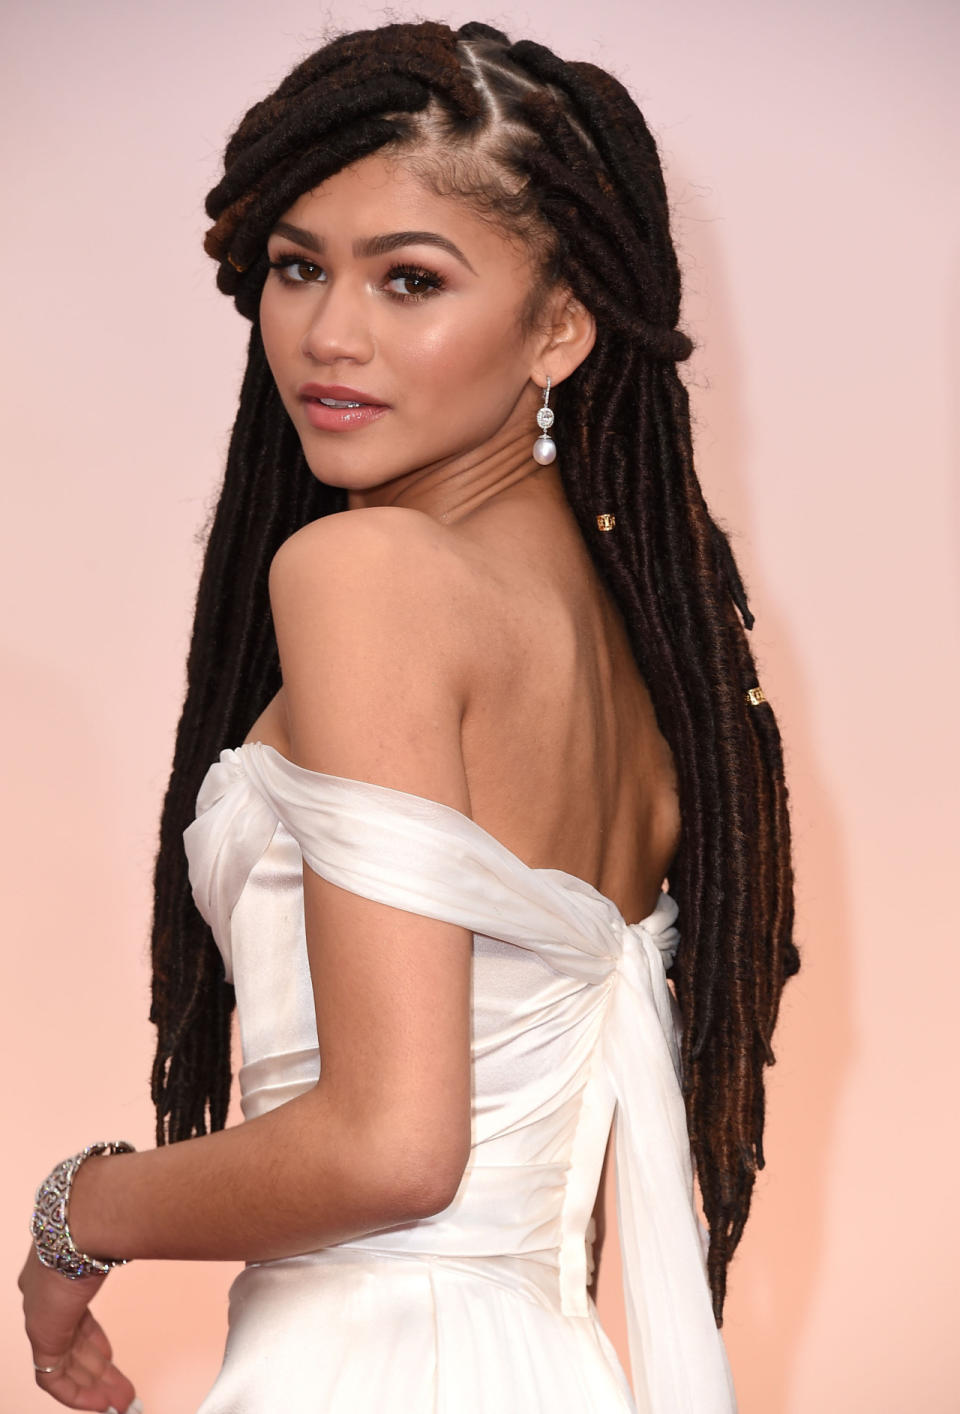 These infamous dreadlocks, worn at the 87th Annual Academy Awards, sparked internet controversy and conversation after Giuliana Rancic made offensive comments about Zendaya and her choice of hairstyle. Zendaya later responded that she chose to wear locs in order to show people that black hair can be beautiful too.